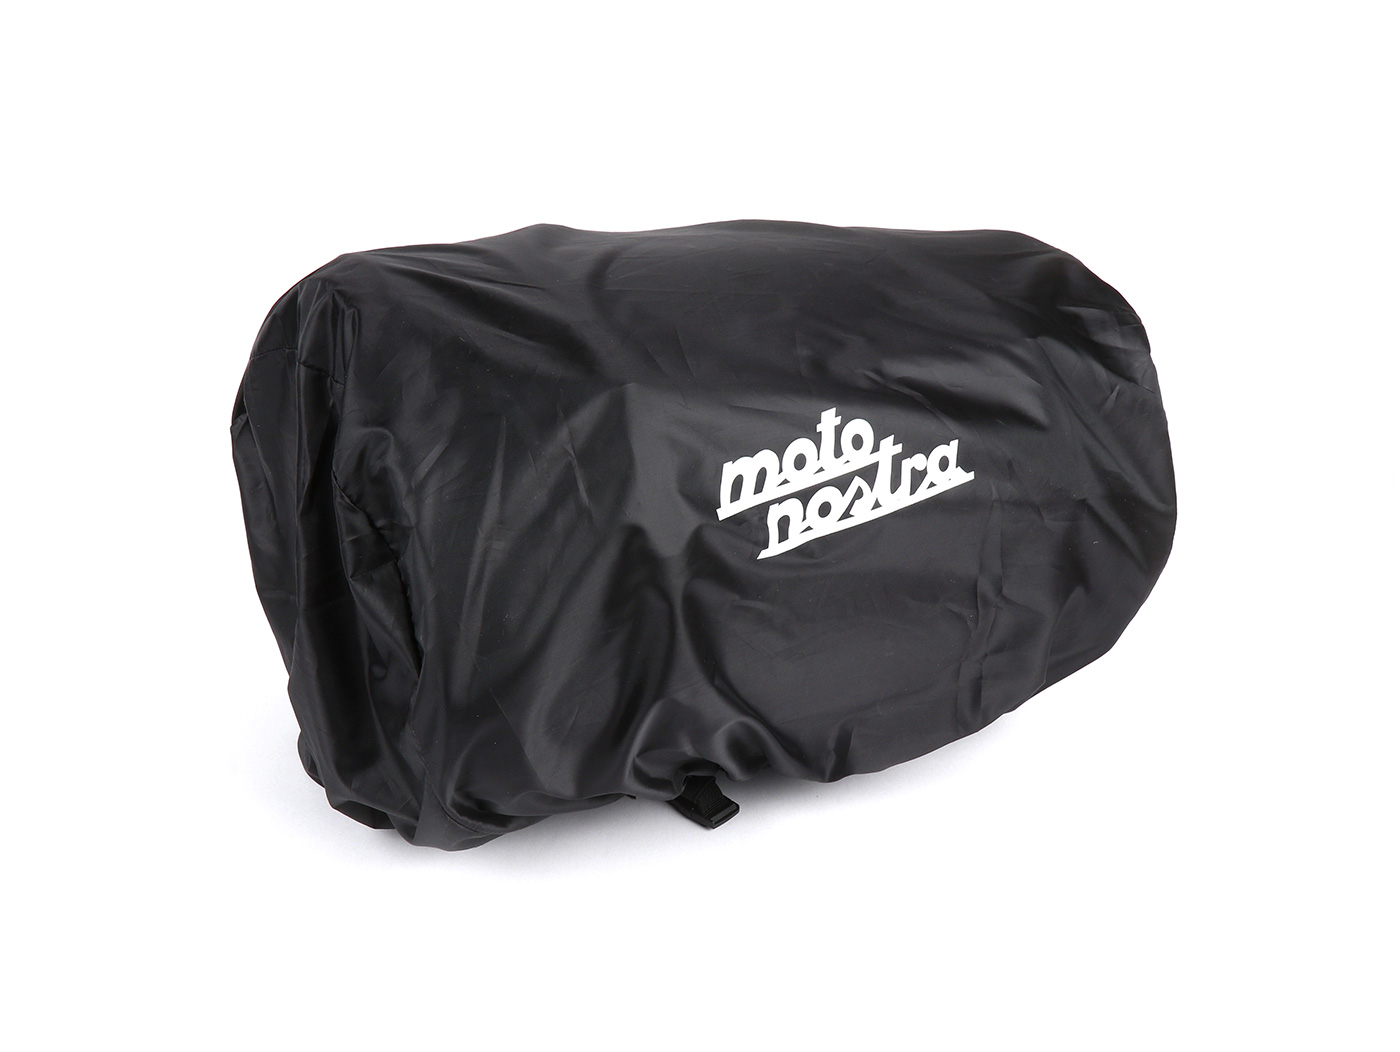 Roll bag (large) for carrier (alternative to topcase) -MOTO NOSTRA Classic  'PU' 480x300x270mm- suitable for e.g. Vespa, Lambretta, GTS, GTV, LX/LXV, 